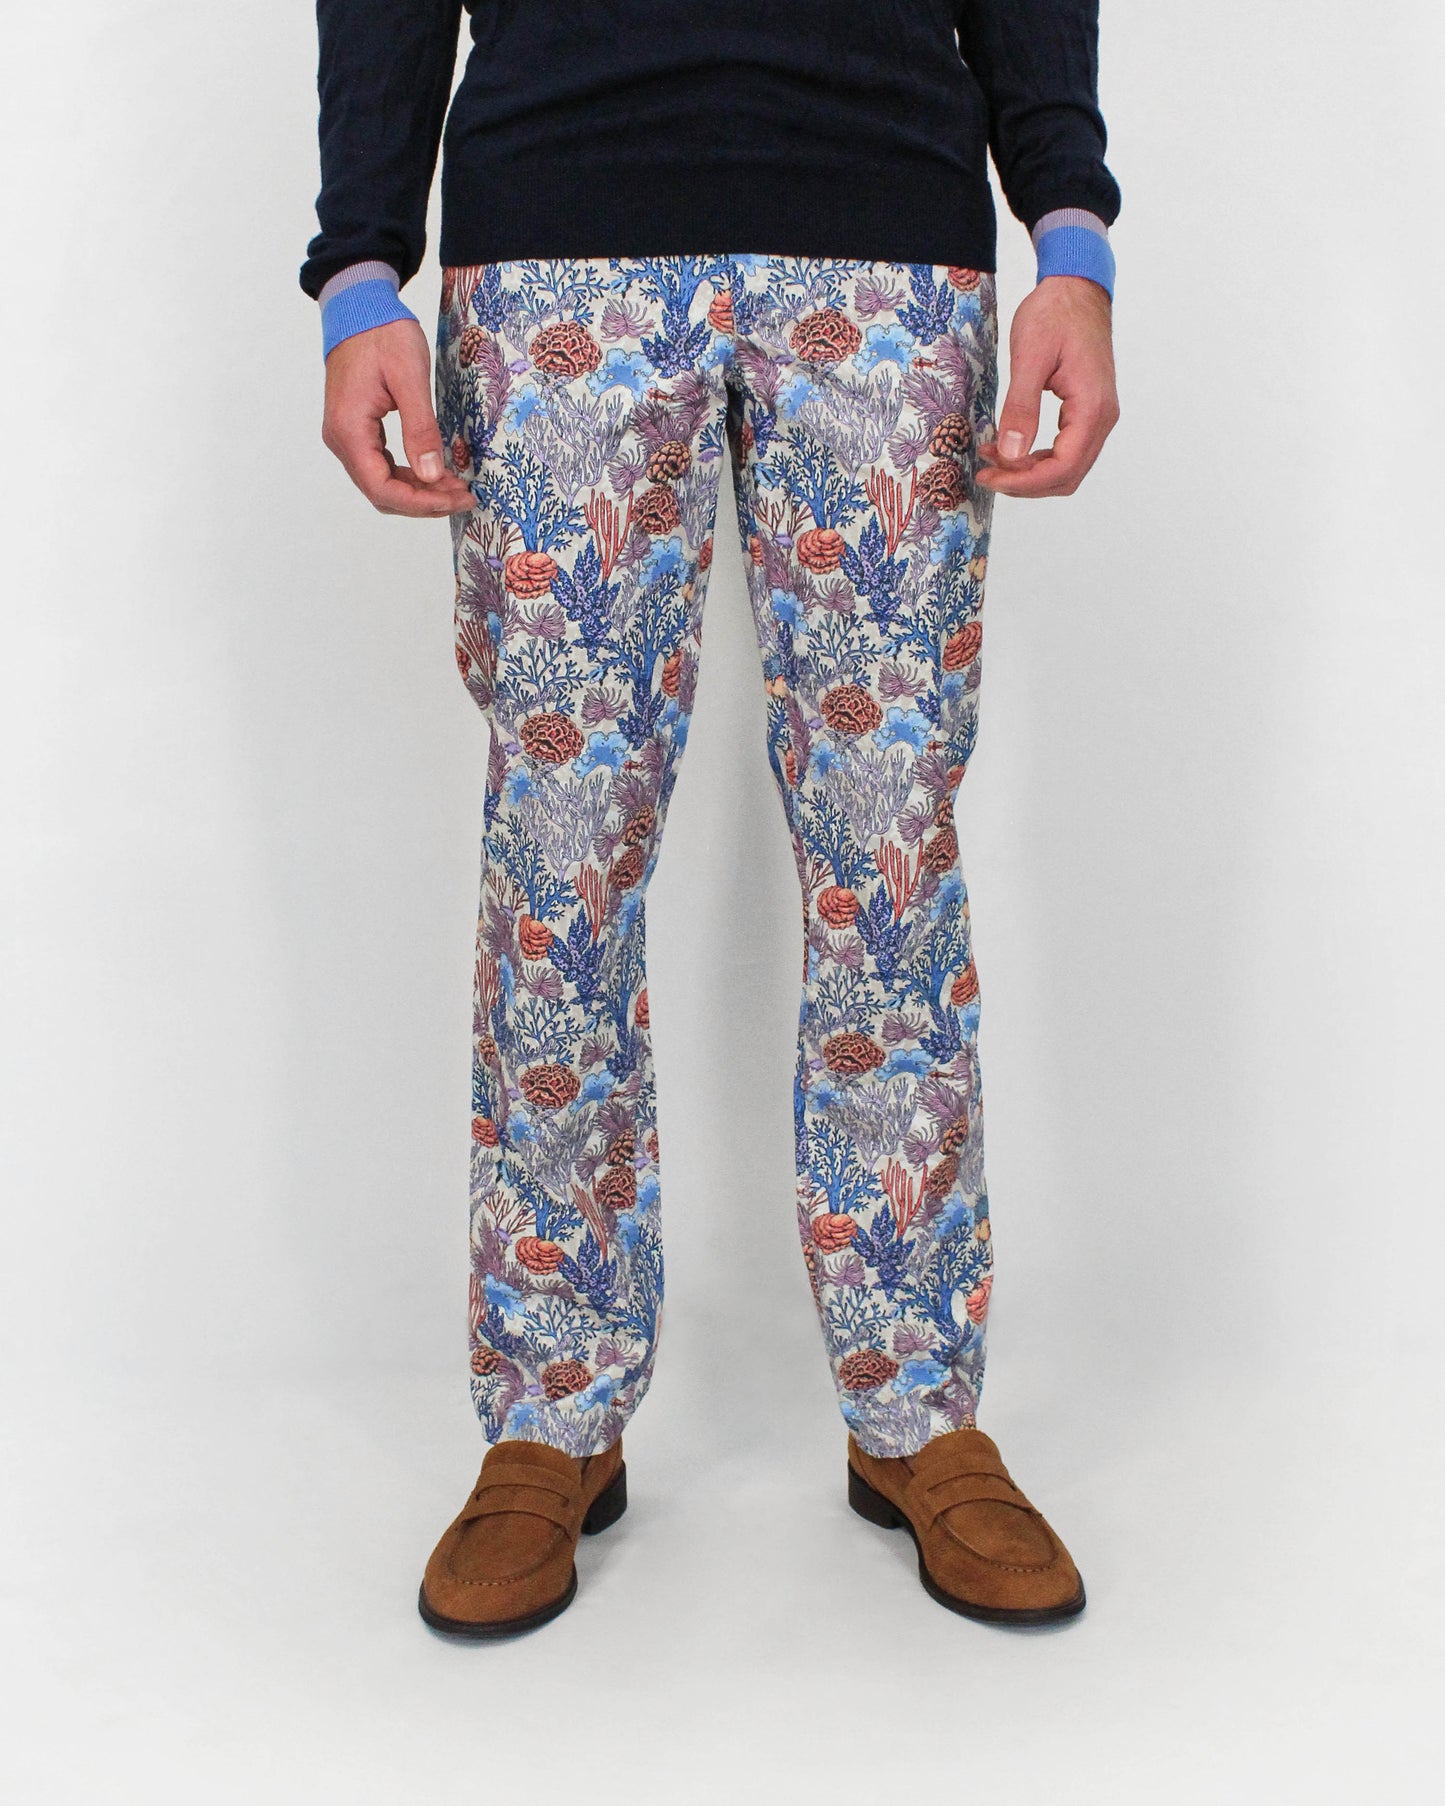 JACK LUX CORAL GARDEN PANTS IN PUMICE